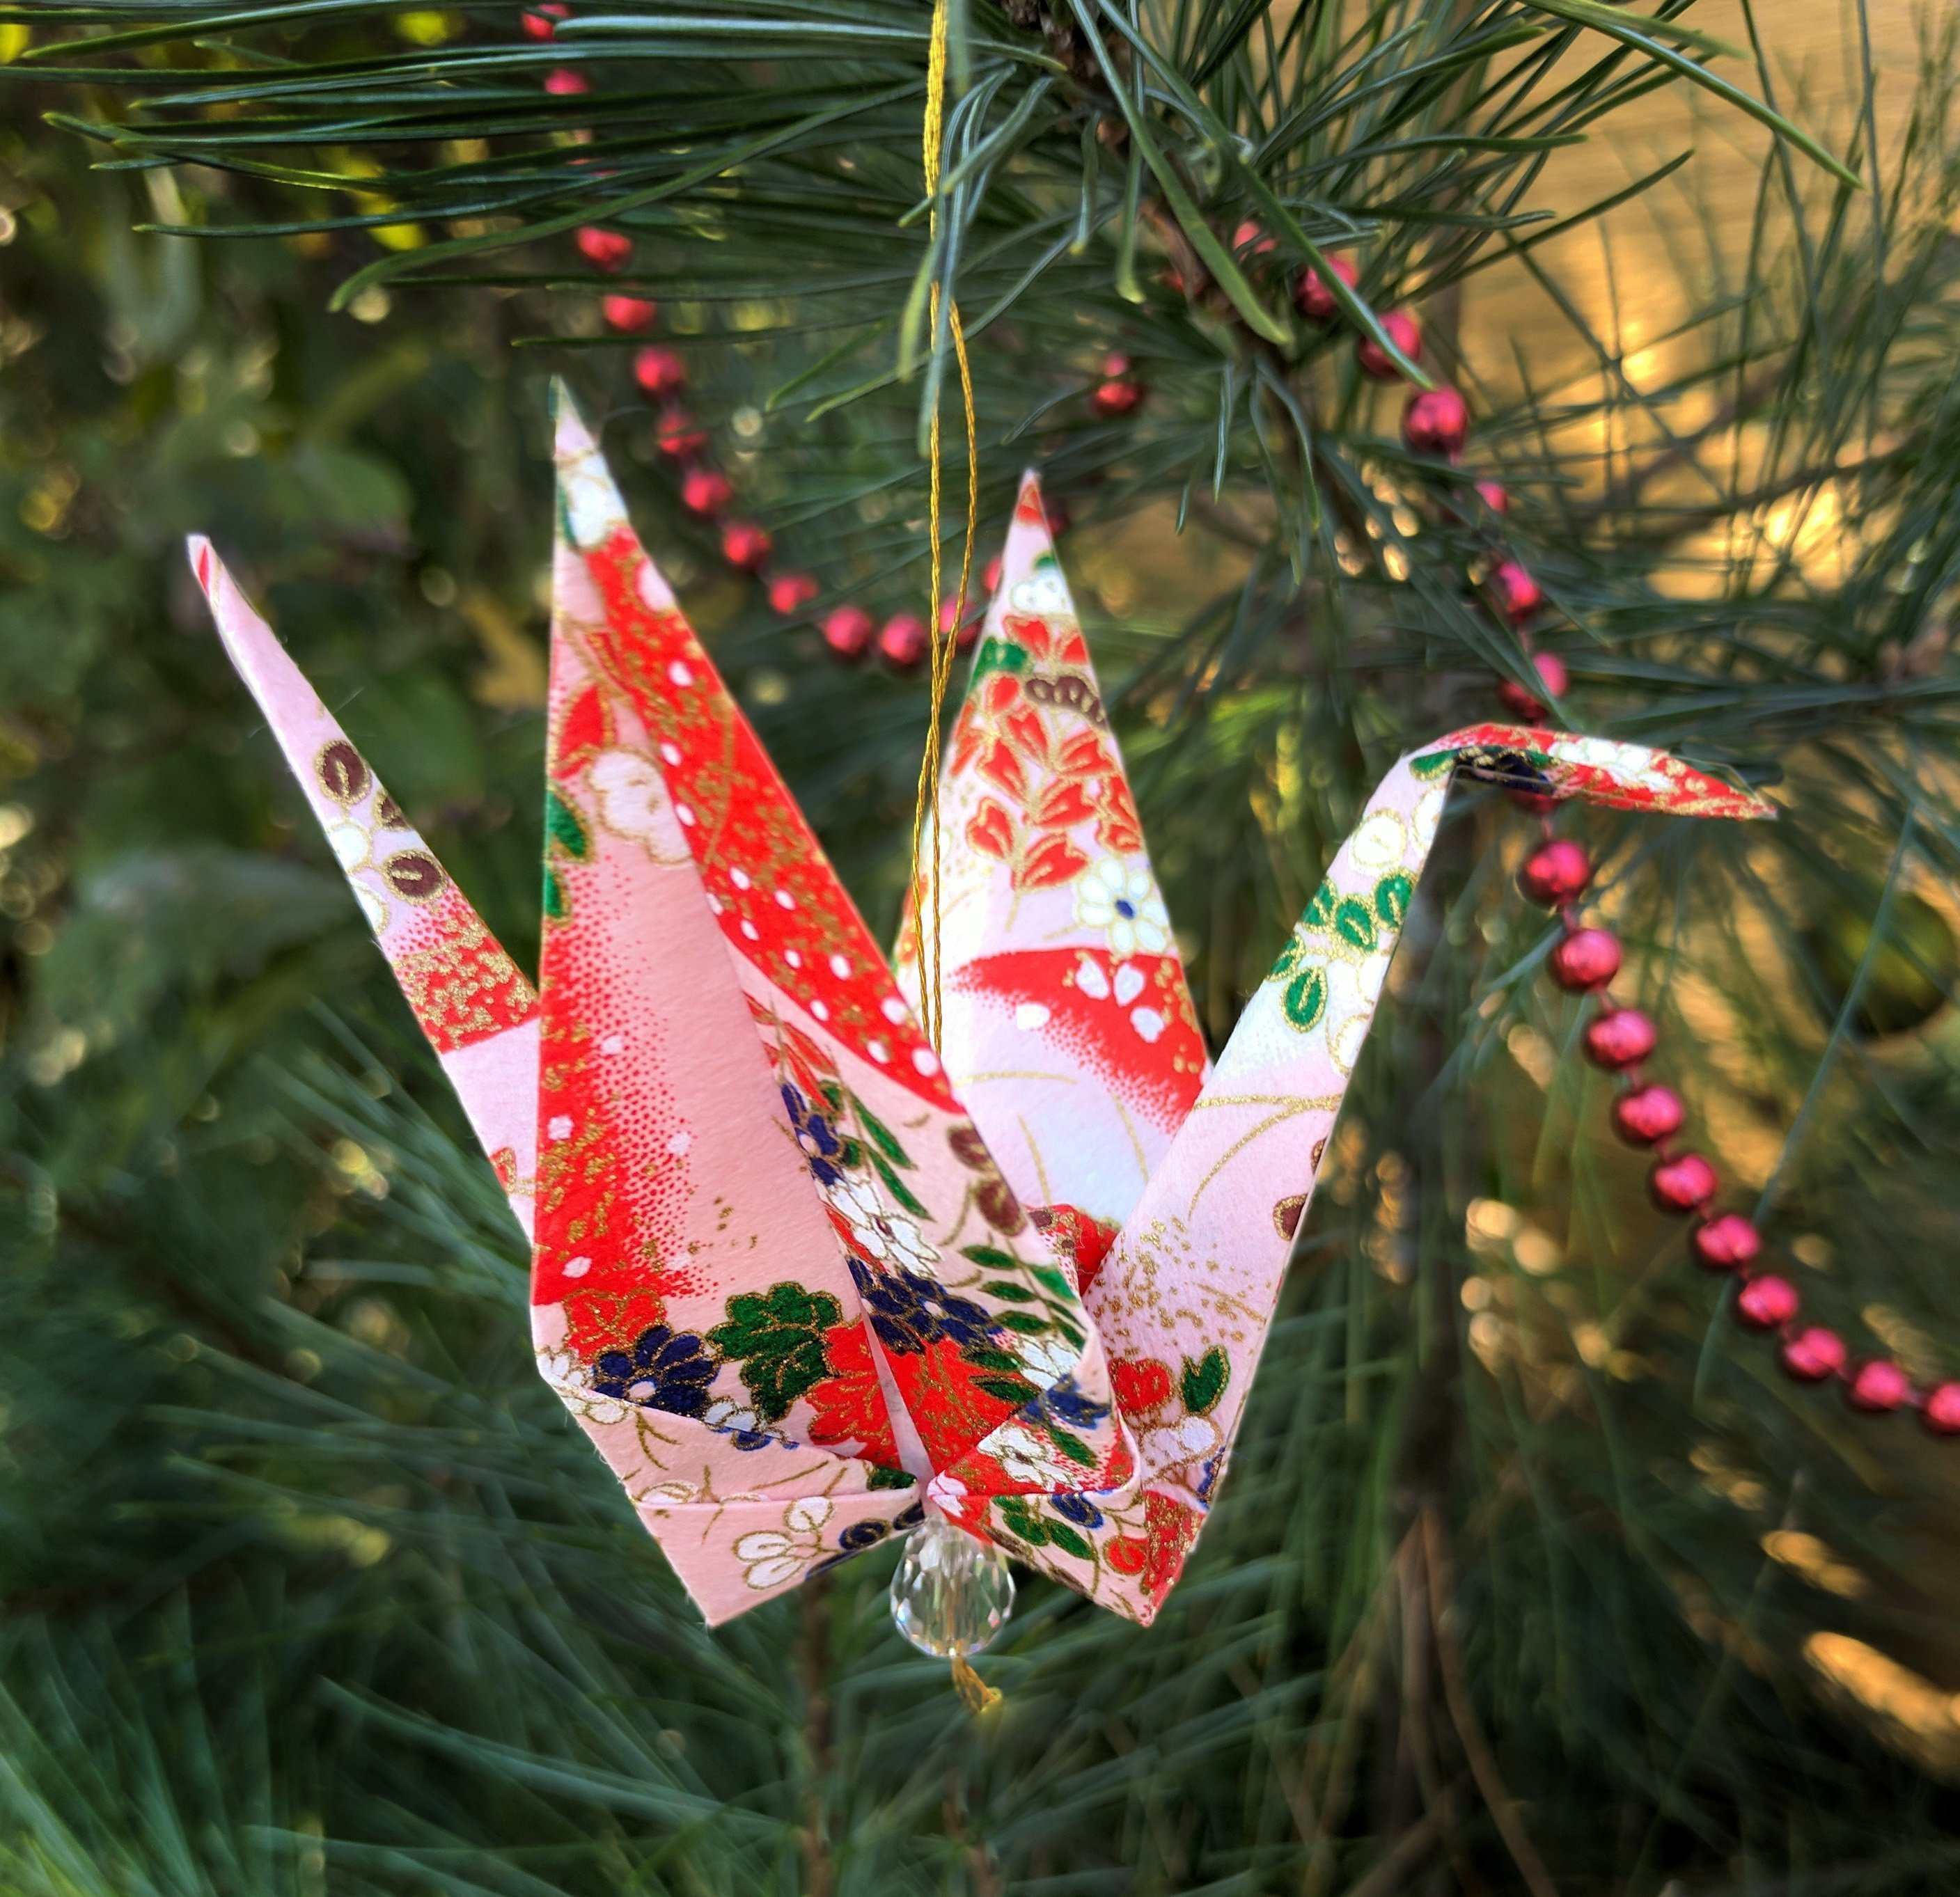 Origami Crane Ornament Christmas Exquisite Origami Ornament Origami Crane Christmas Ornament Of Japanese Paper Hanging With Sparkling Crystal Red Gift Boxed A1hgxm